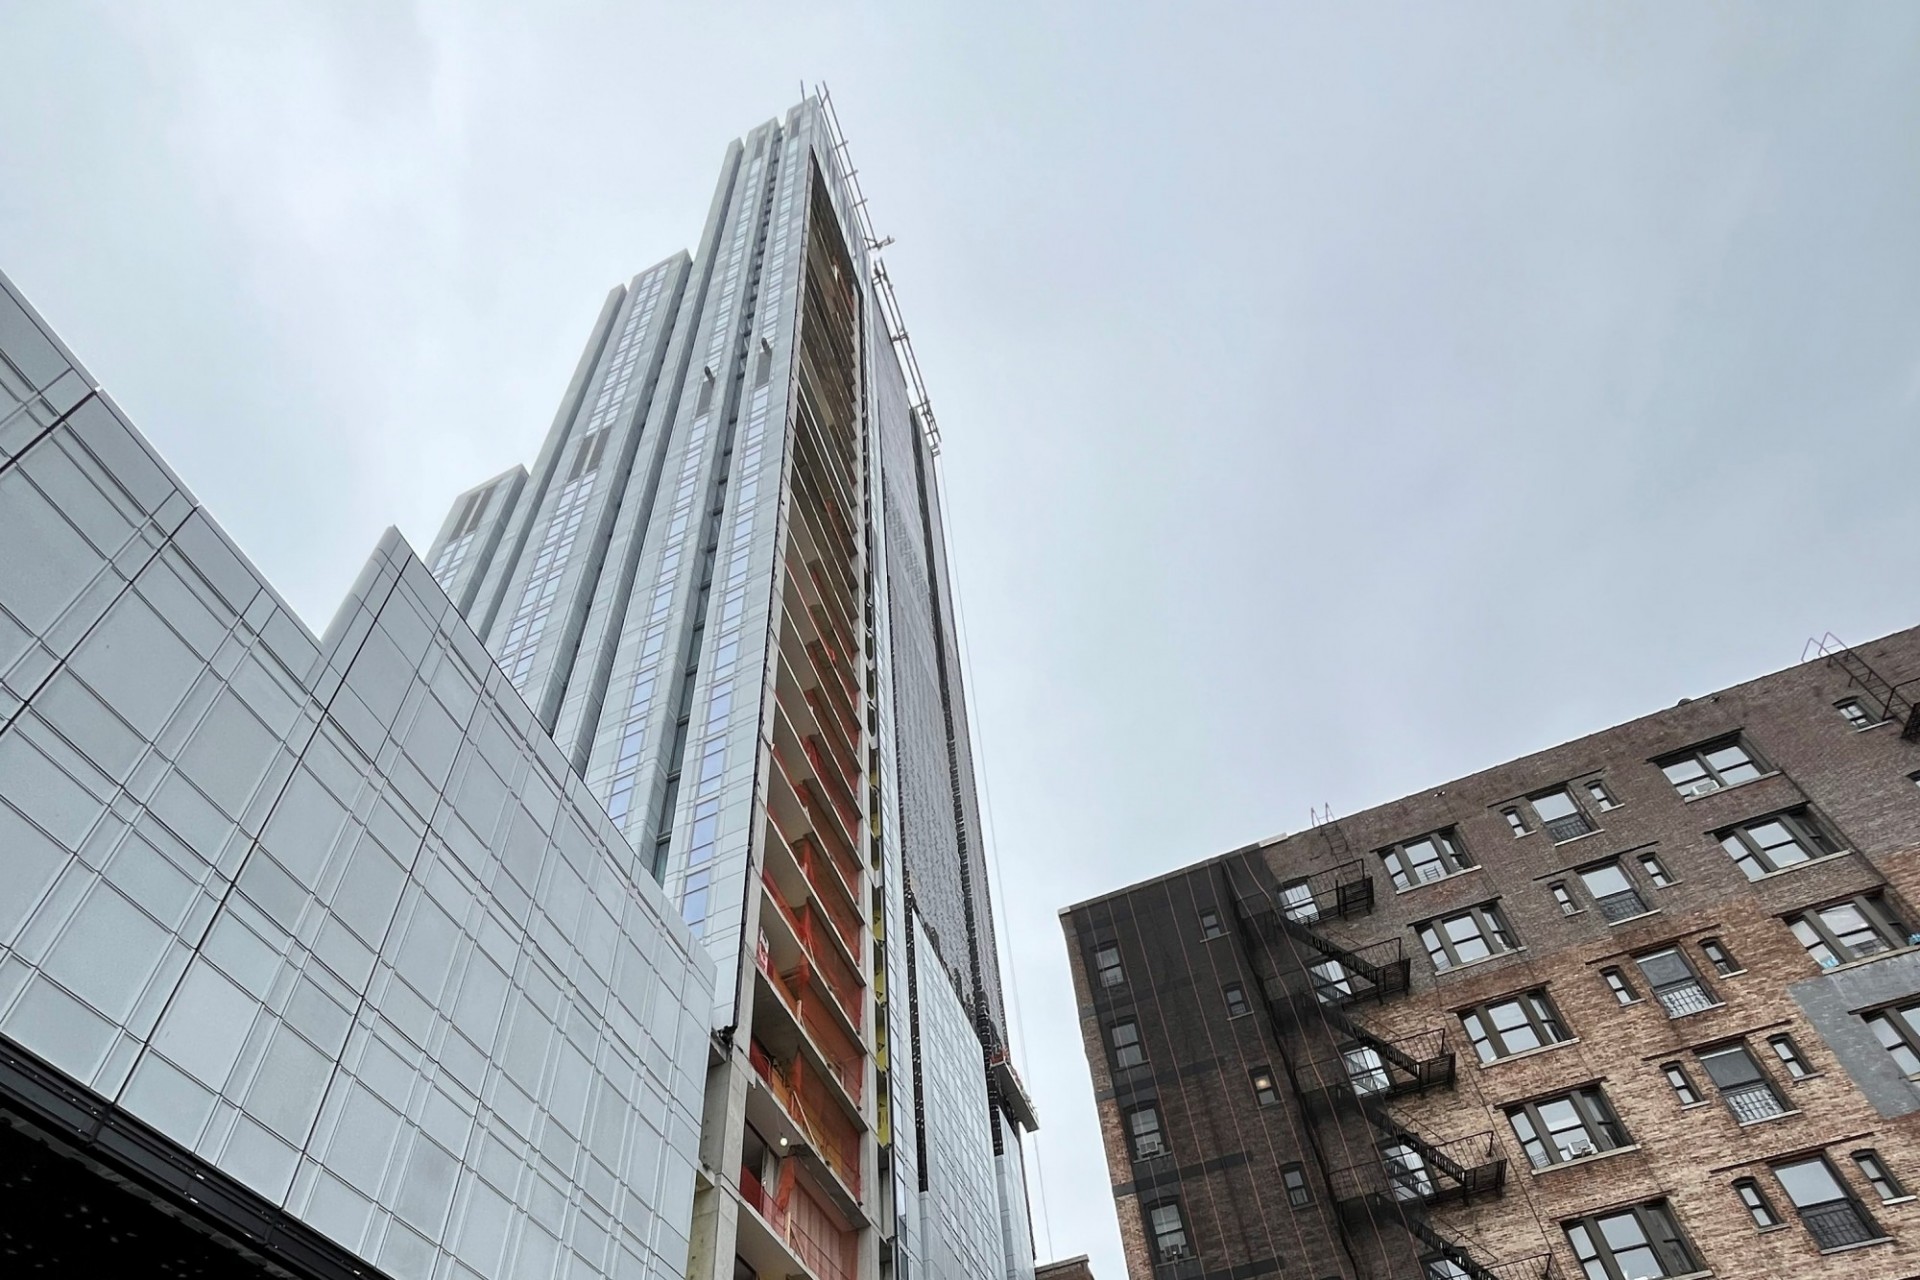 A view of the 600 W. 125th Street from the street level, looking up to the upper floors.